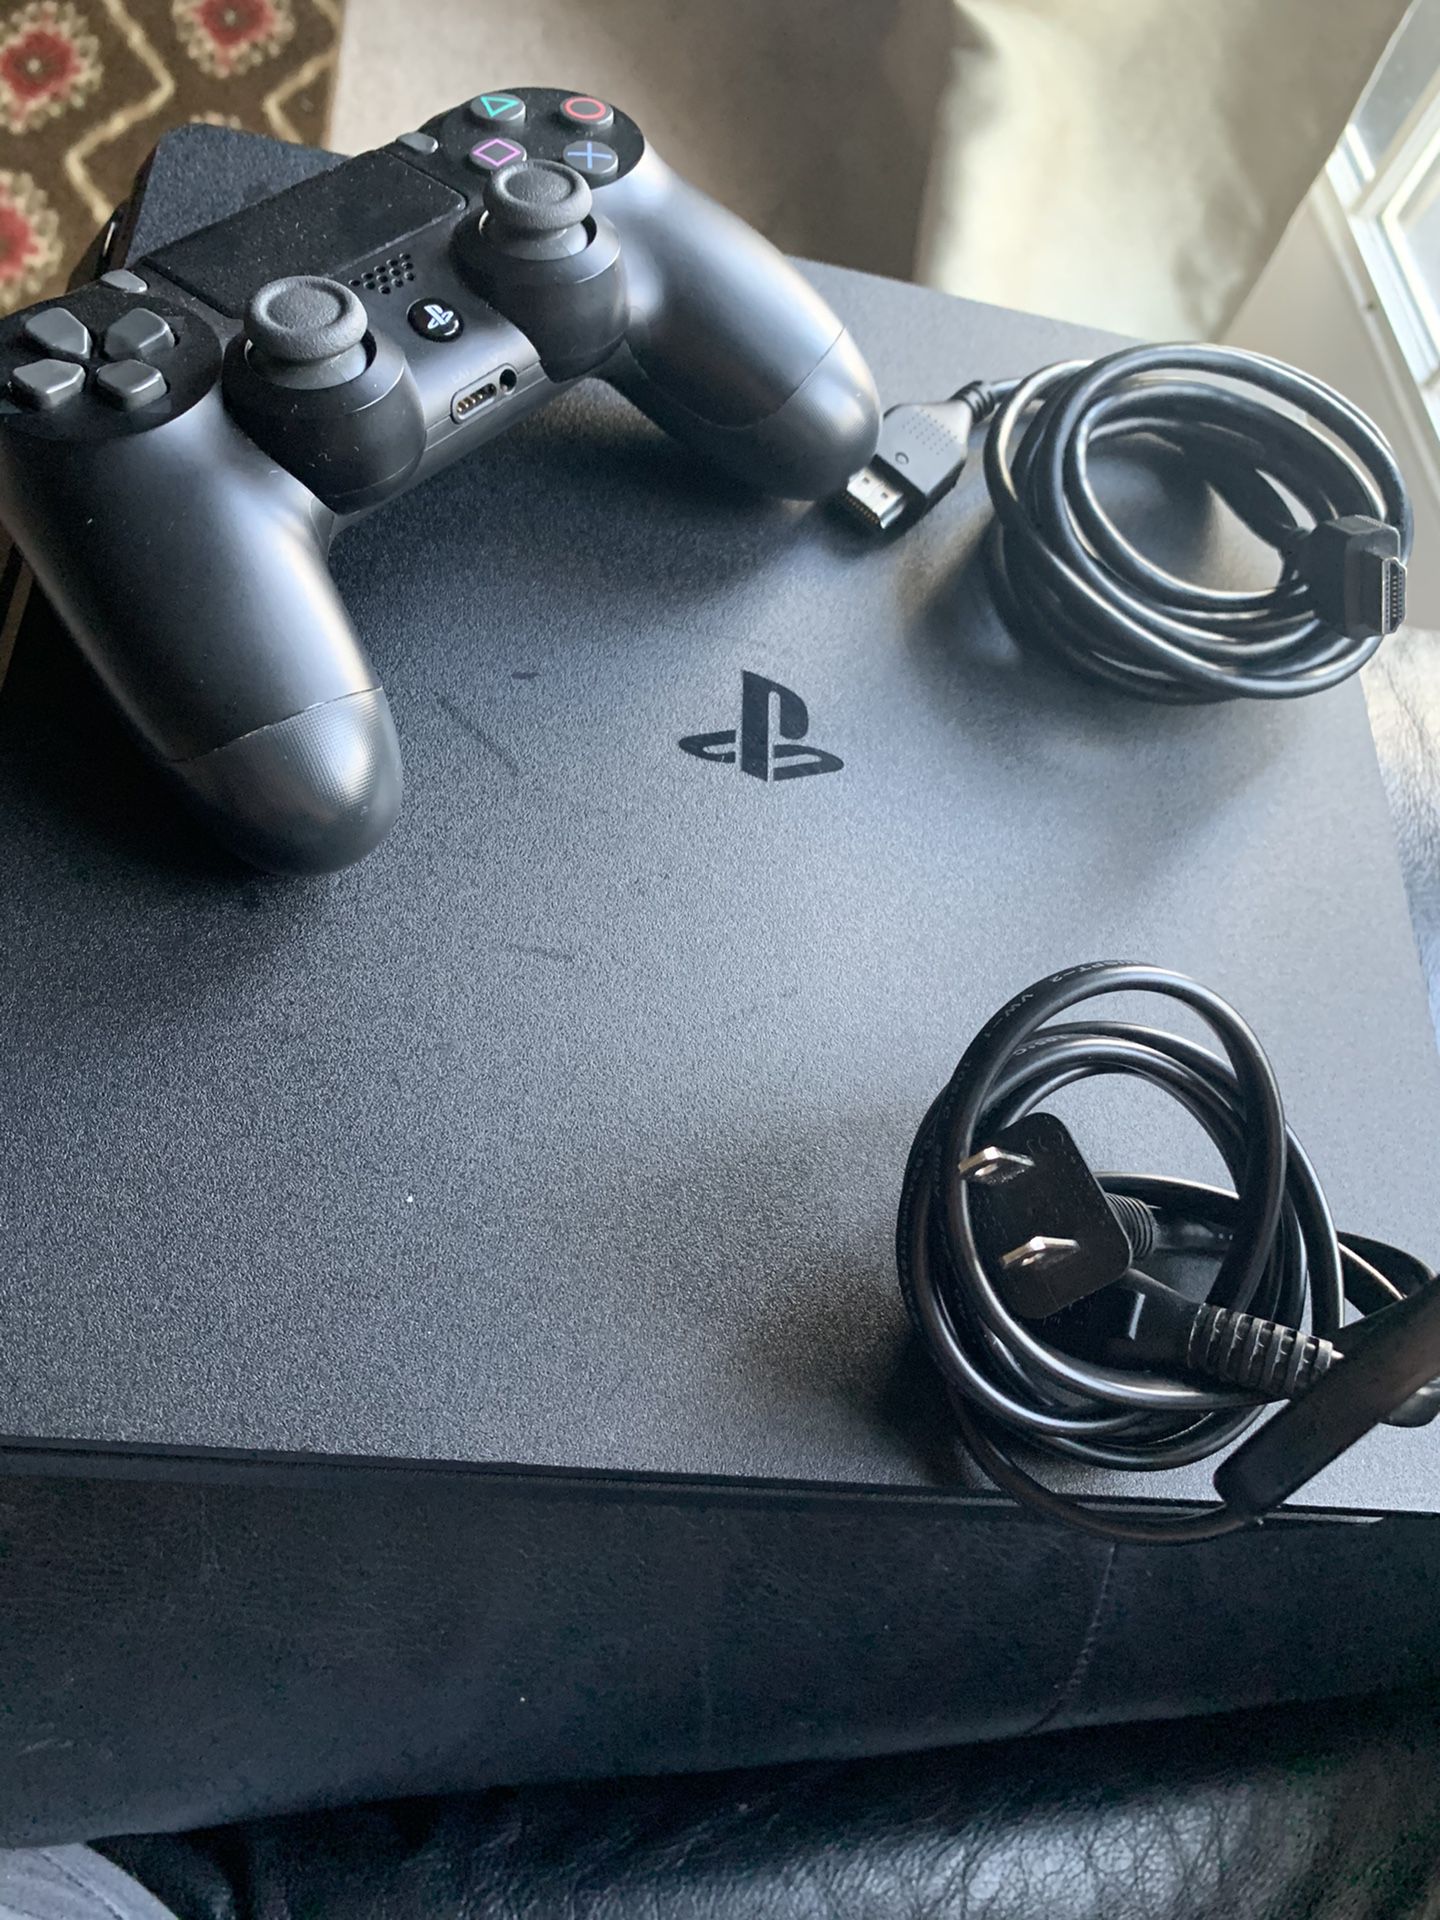 Sony Playstation 4/ 1,000 Gigabytes/ Excellent Condition/ 1 Wireless Controller/ All Wires/Box/